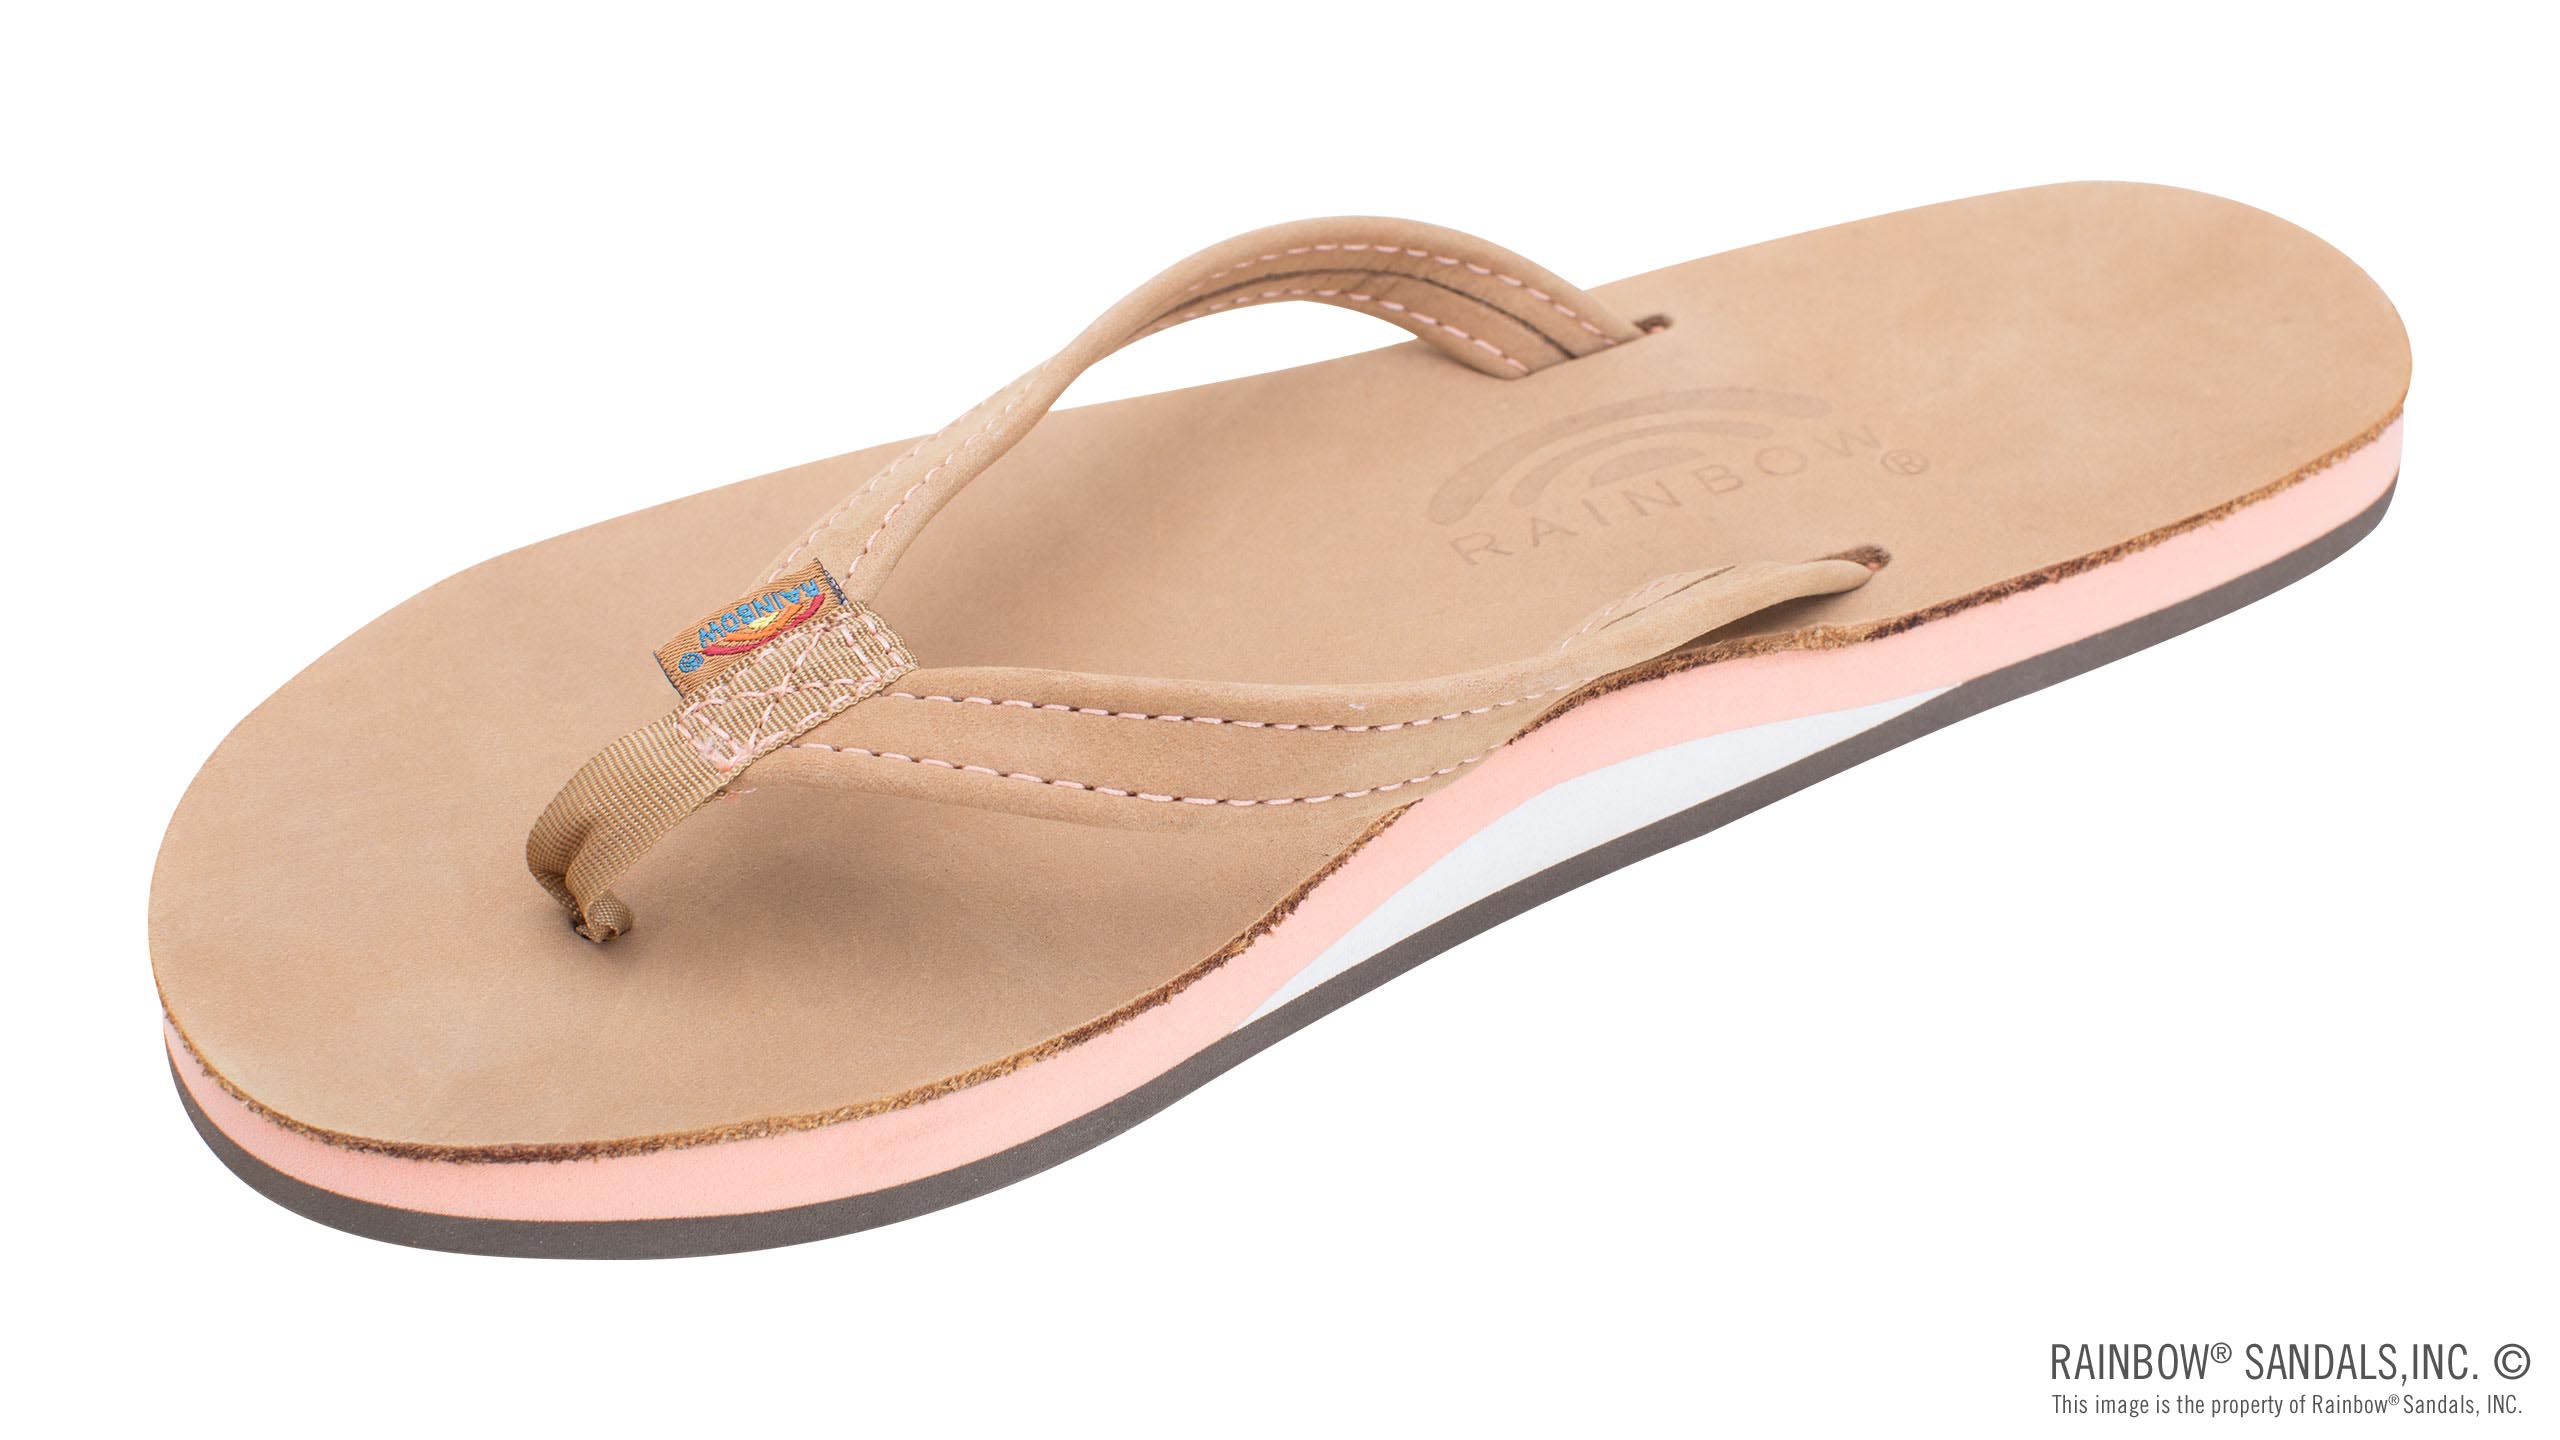 The Tropics - Single Layer Premier Leather with Colorful Mid Sole and a  1/2 Narrow Strap